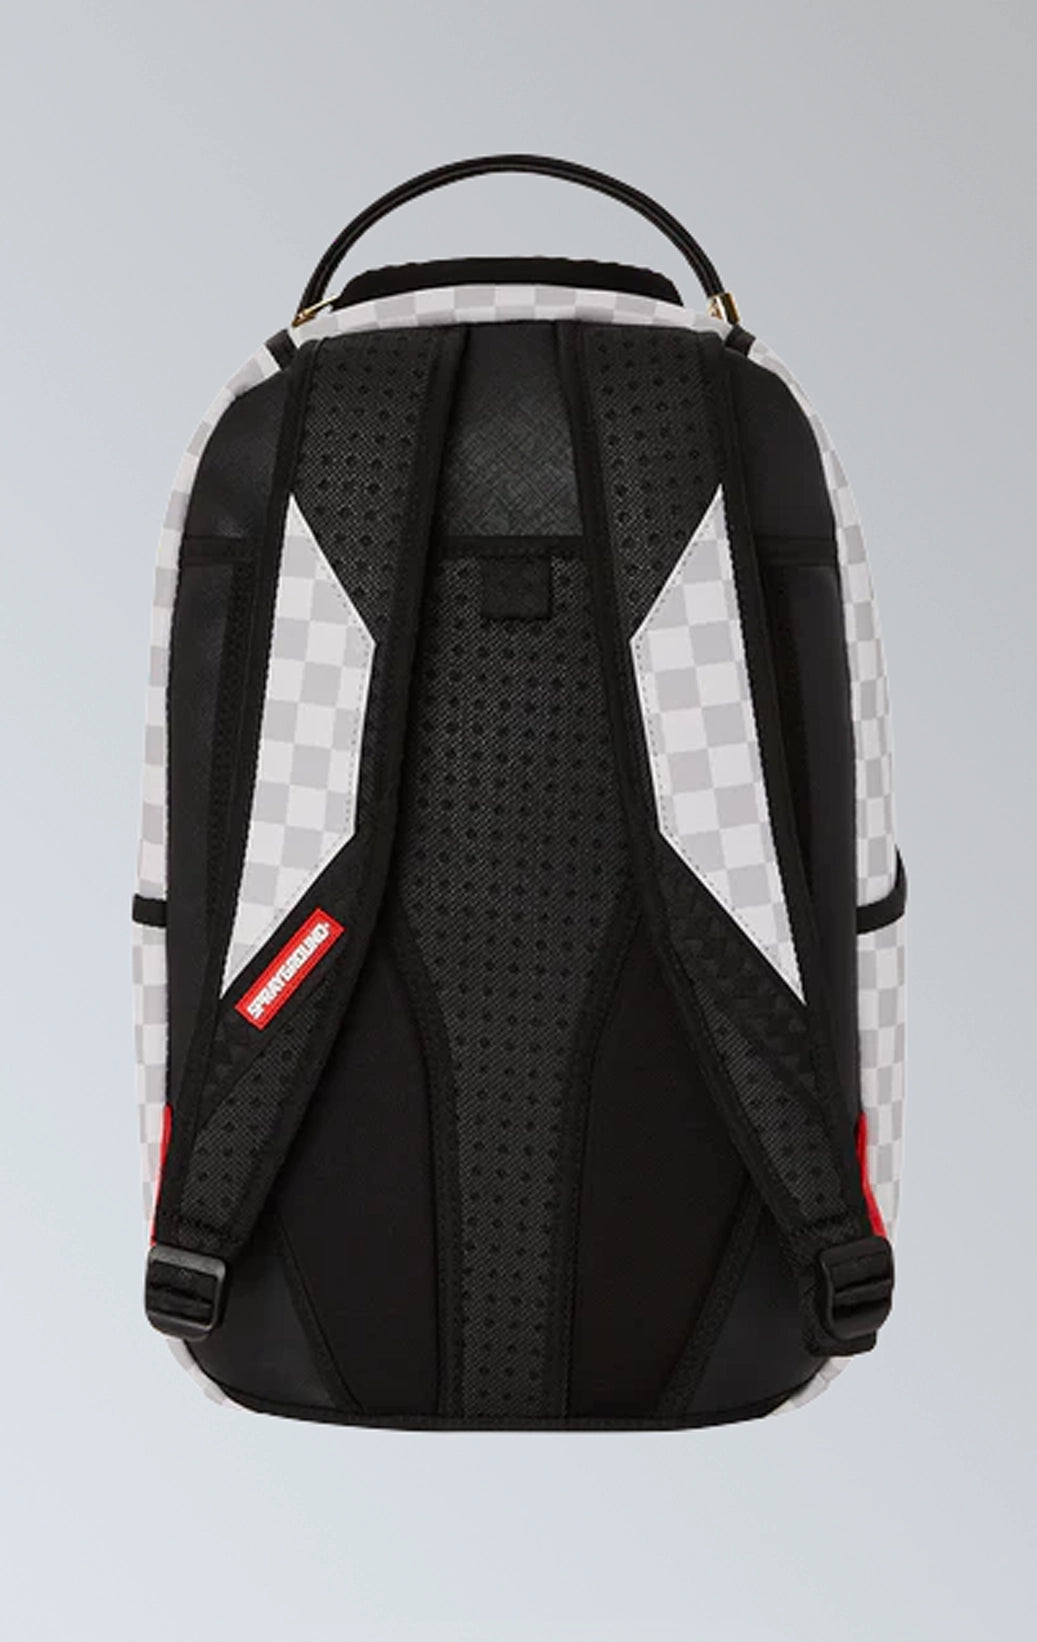 Sprayground Astromane backpack, grey with checkered pattern and laser-cut details. Limited edition.